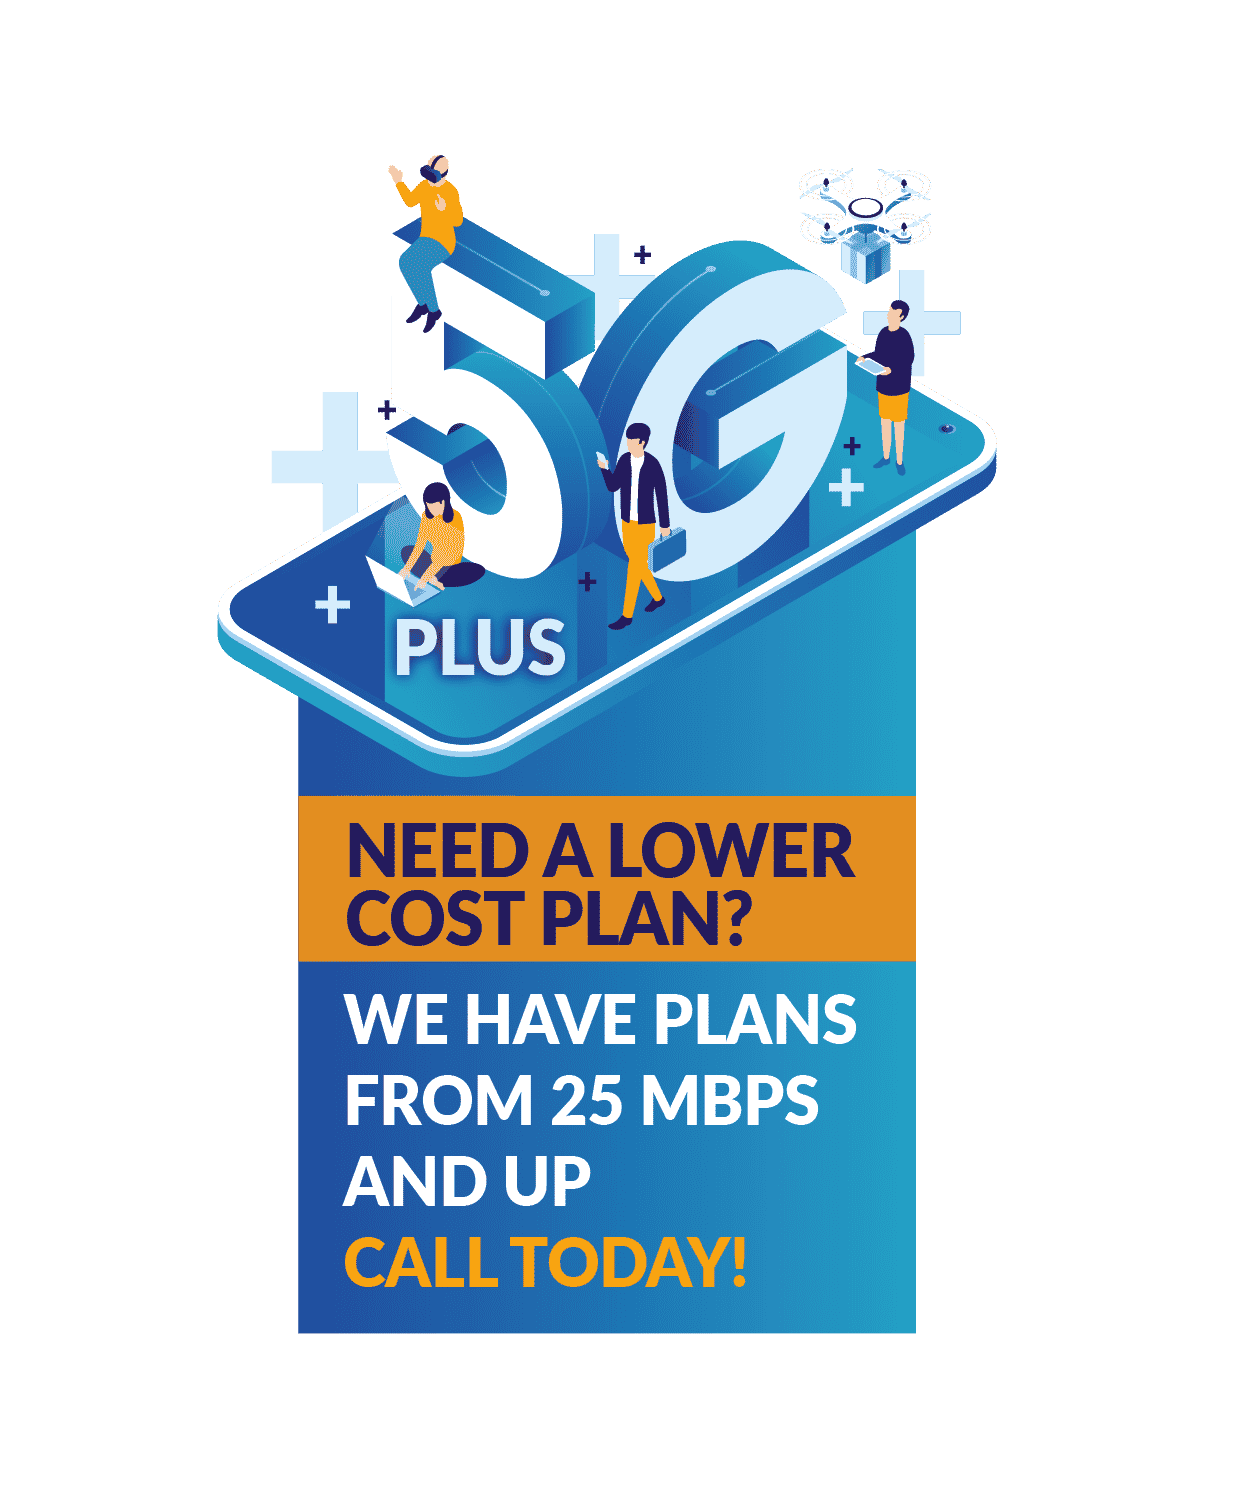 4G LTE and Point to Point Reliable Rural Internet Service